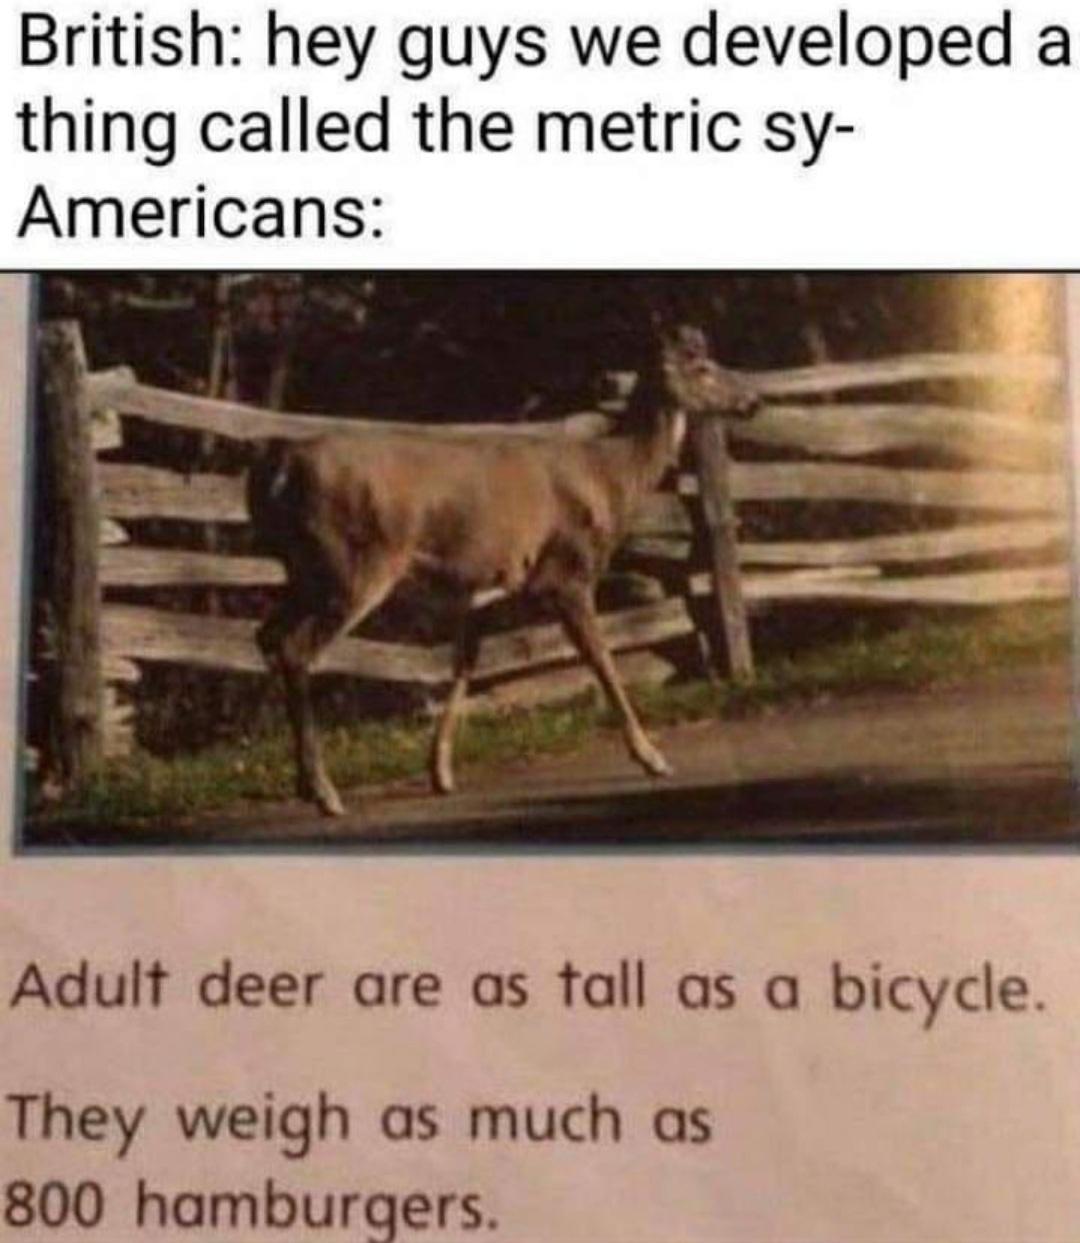 monday morning randomness - americans will use anything but the metric system - British hey guys we developed a thing called the metric sy Americans Adult deer are as tall as a bicycle. They weigh as much as 800 hamburgers.